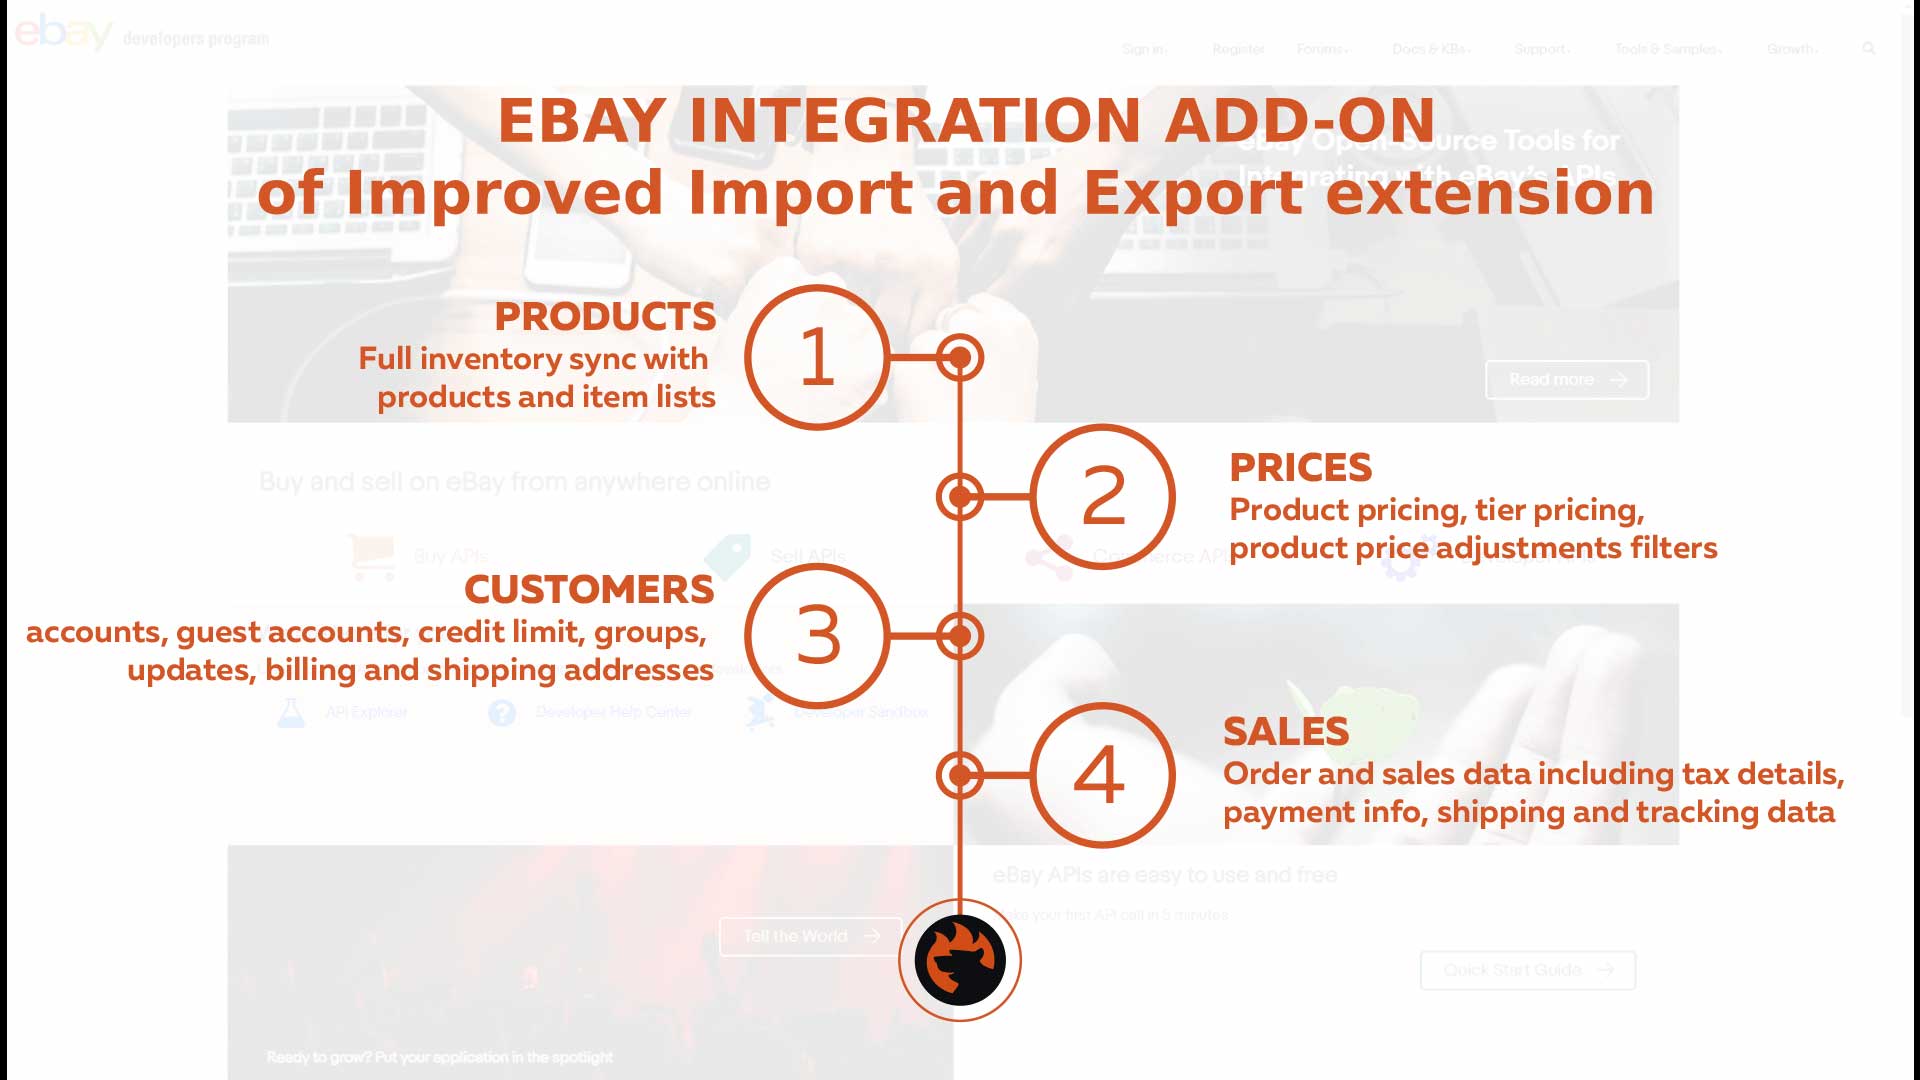 Magento 2 integration with Ebay add-on connector